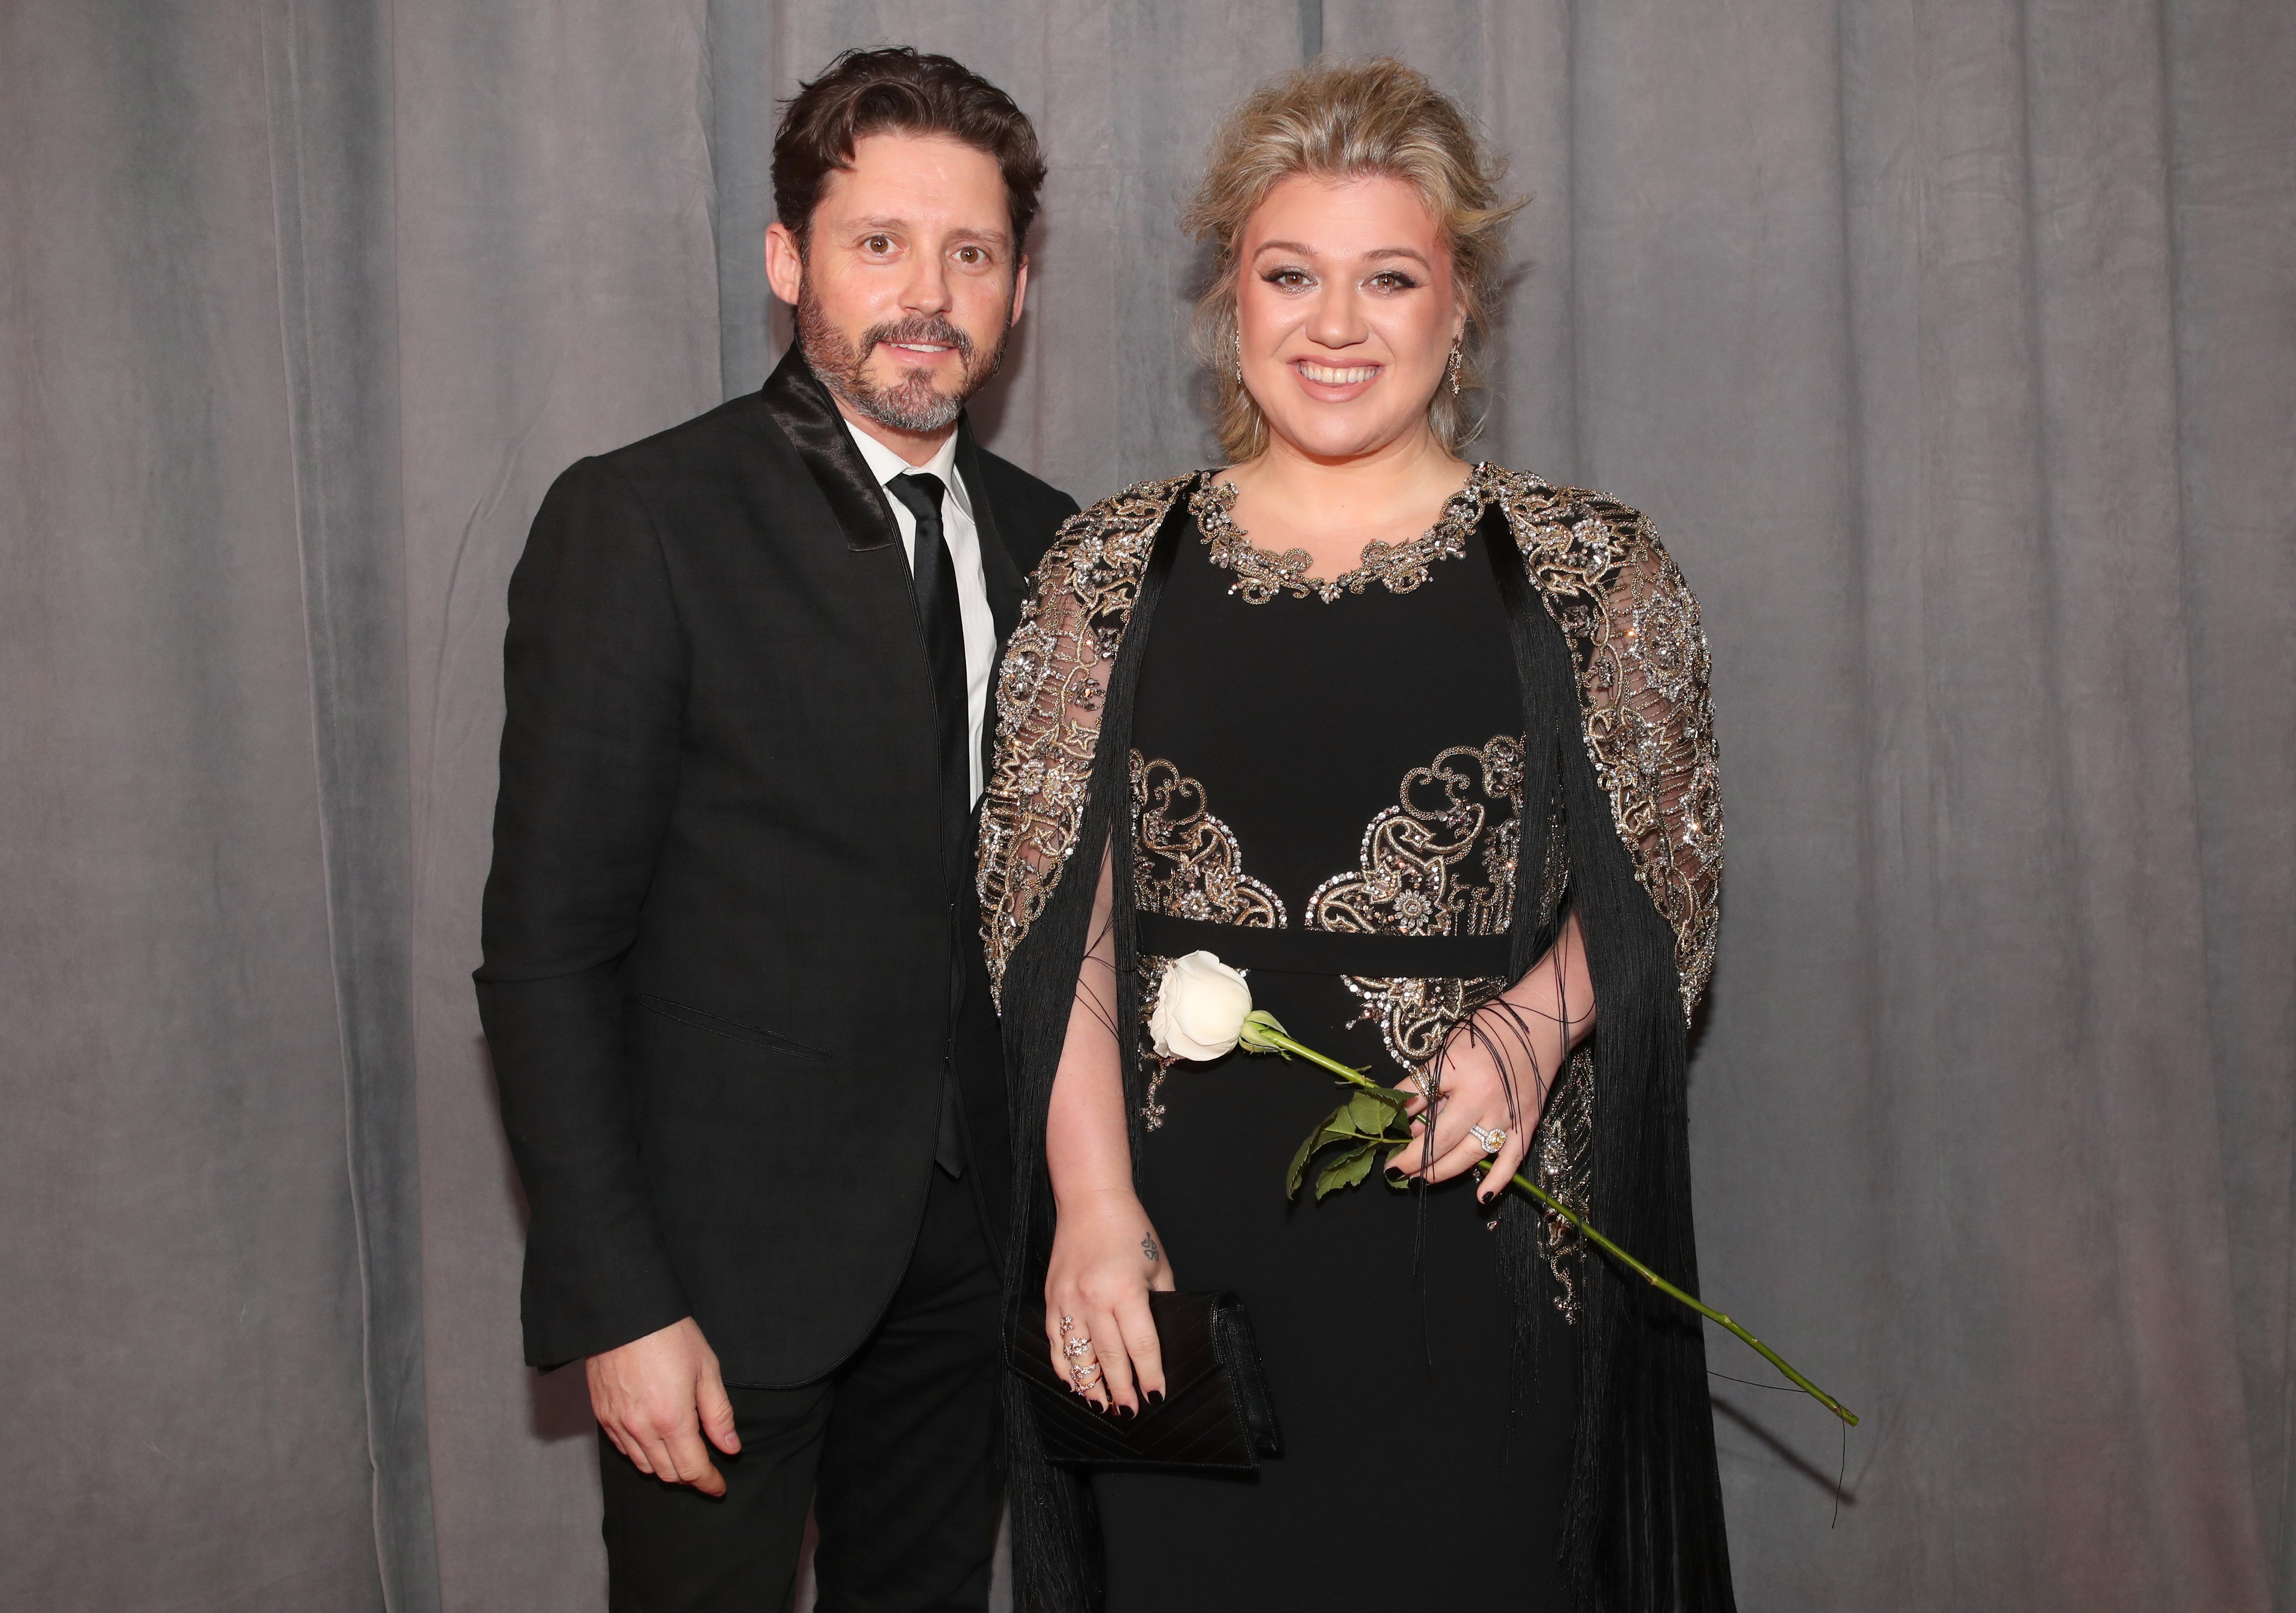 Brandon Blackstock and his wife singer Kelly Clarkson attending the 60th Annual Grammy Awards at Madison Square Garden on January 28, 2018 in New York City. | Source: Getty Images